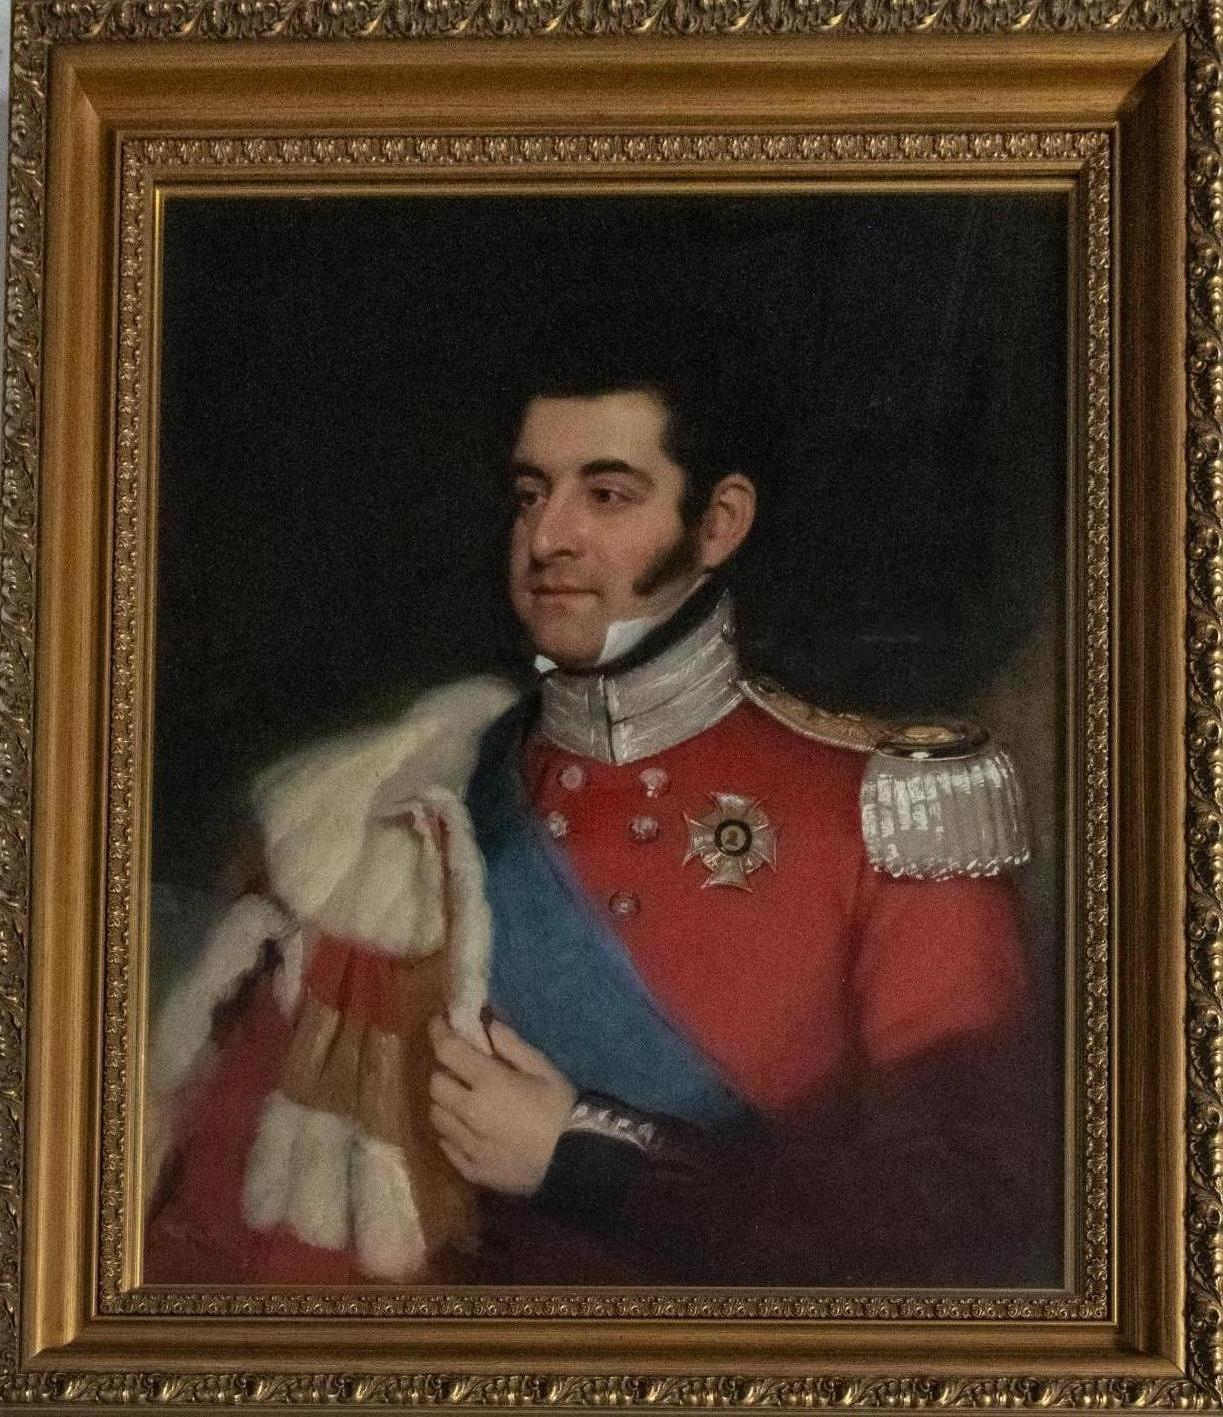 19th century portrait military officer 5th Royal Lancashire Militia, East Lancs - Realist Painting by English School